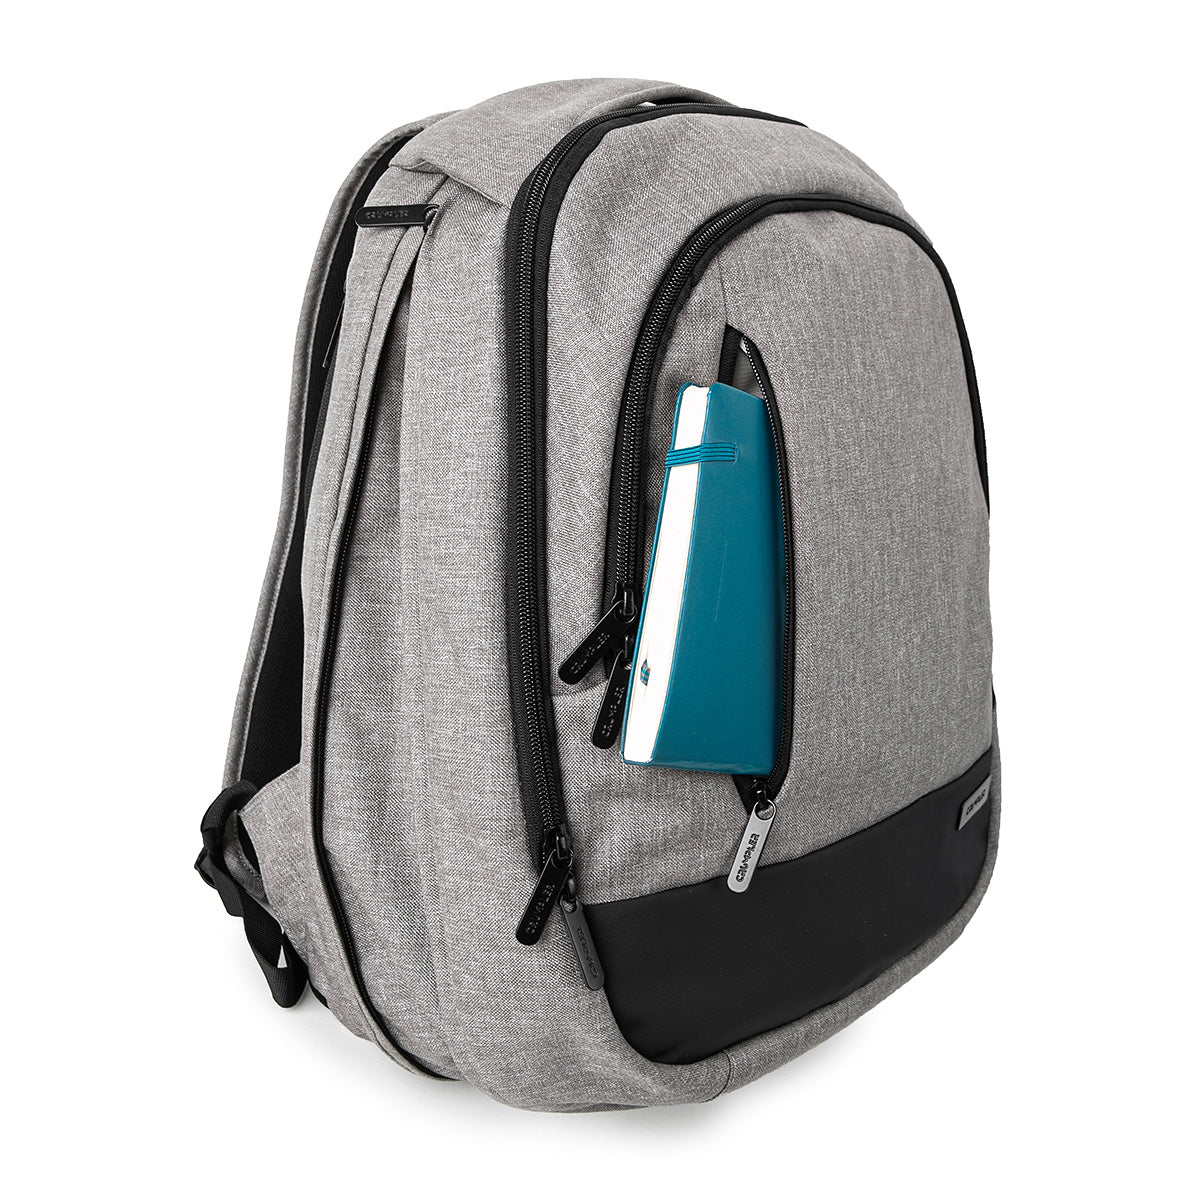 Mantra Office Pro Backpack